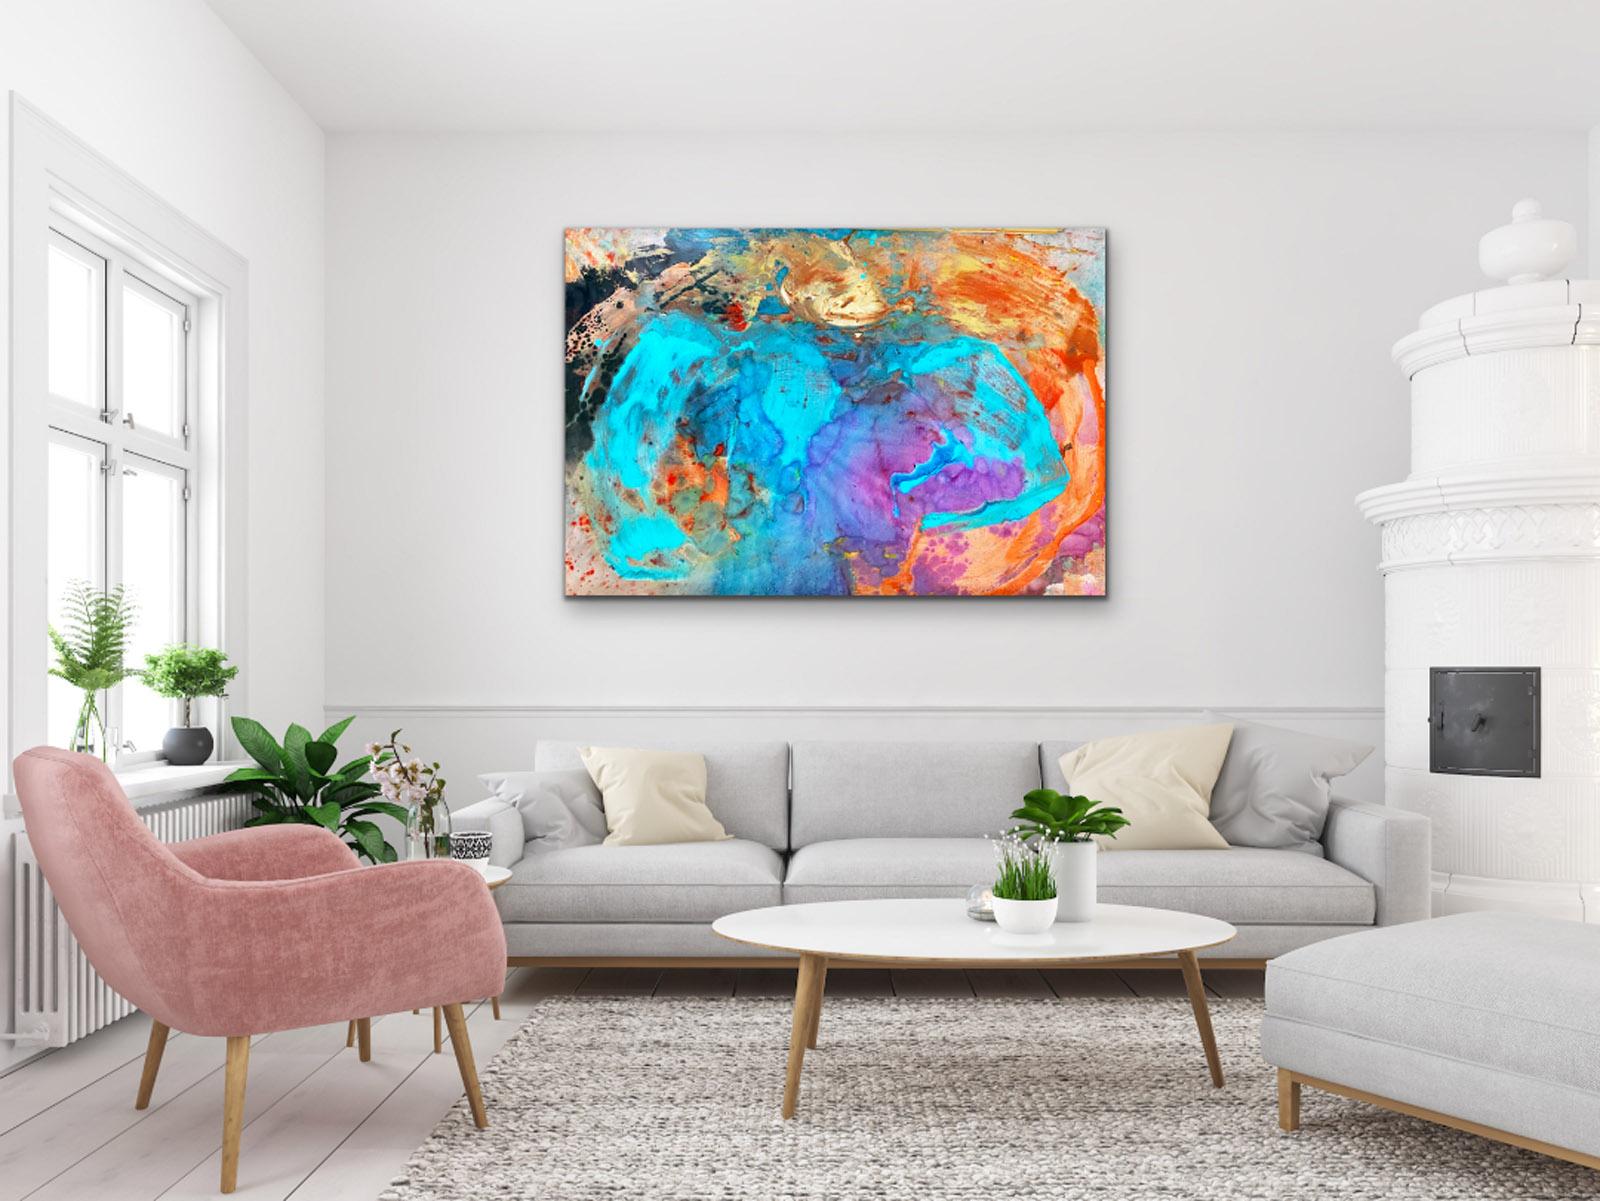 My paintings serve as records of a process of disclosure, drawn from my own life events, literature, and dreams. Finding inspiration in the movementsof color-based and action painting, and painters such as Larry Poons, I have developed a unique and